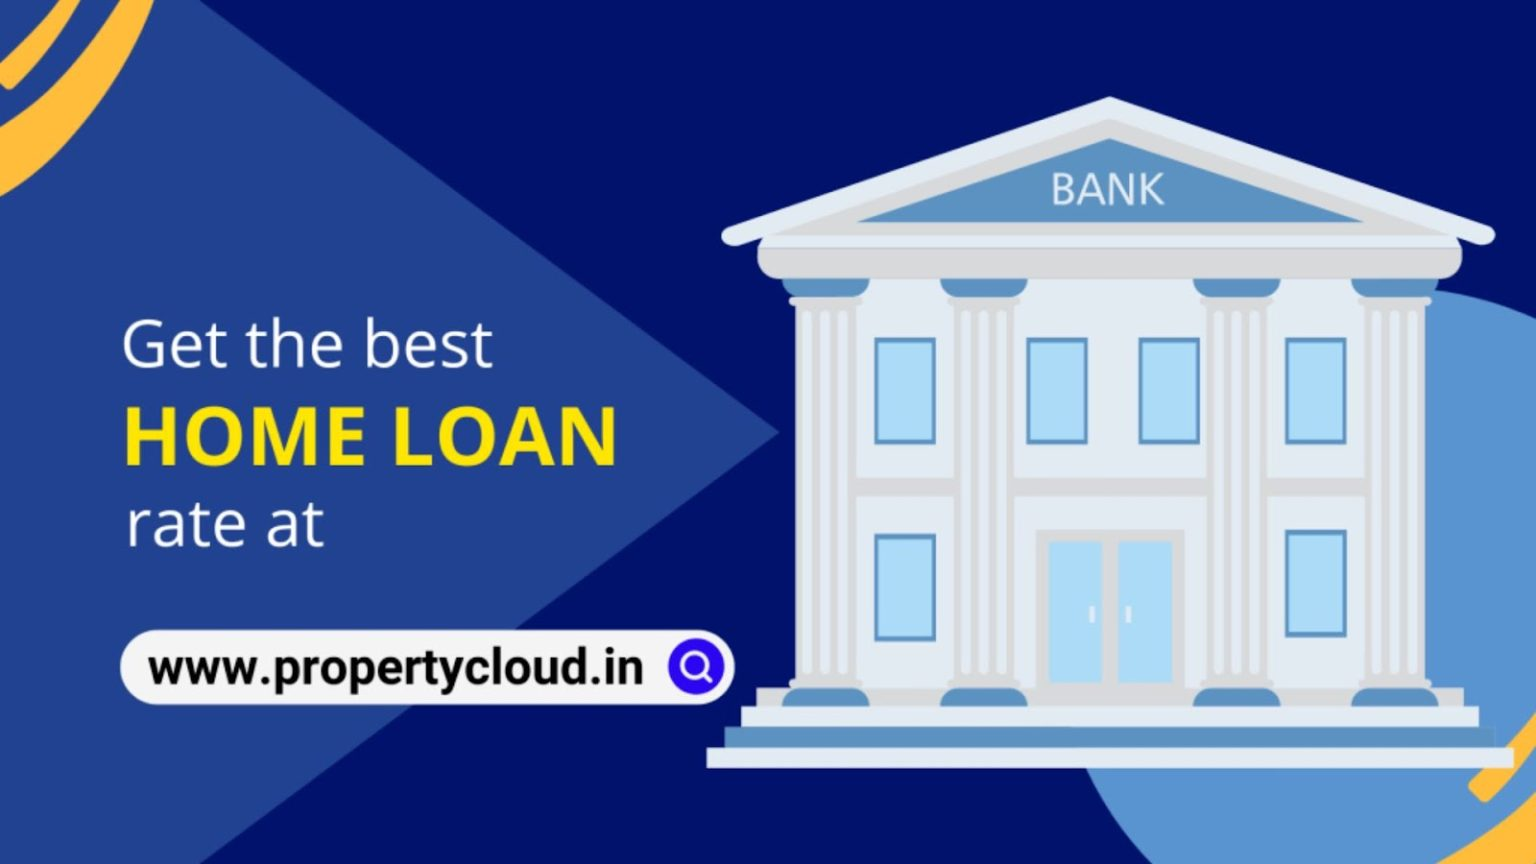 Contact PropertyCloud loan experts and get a hassle-free home loan at an affordable rate.